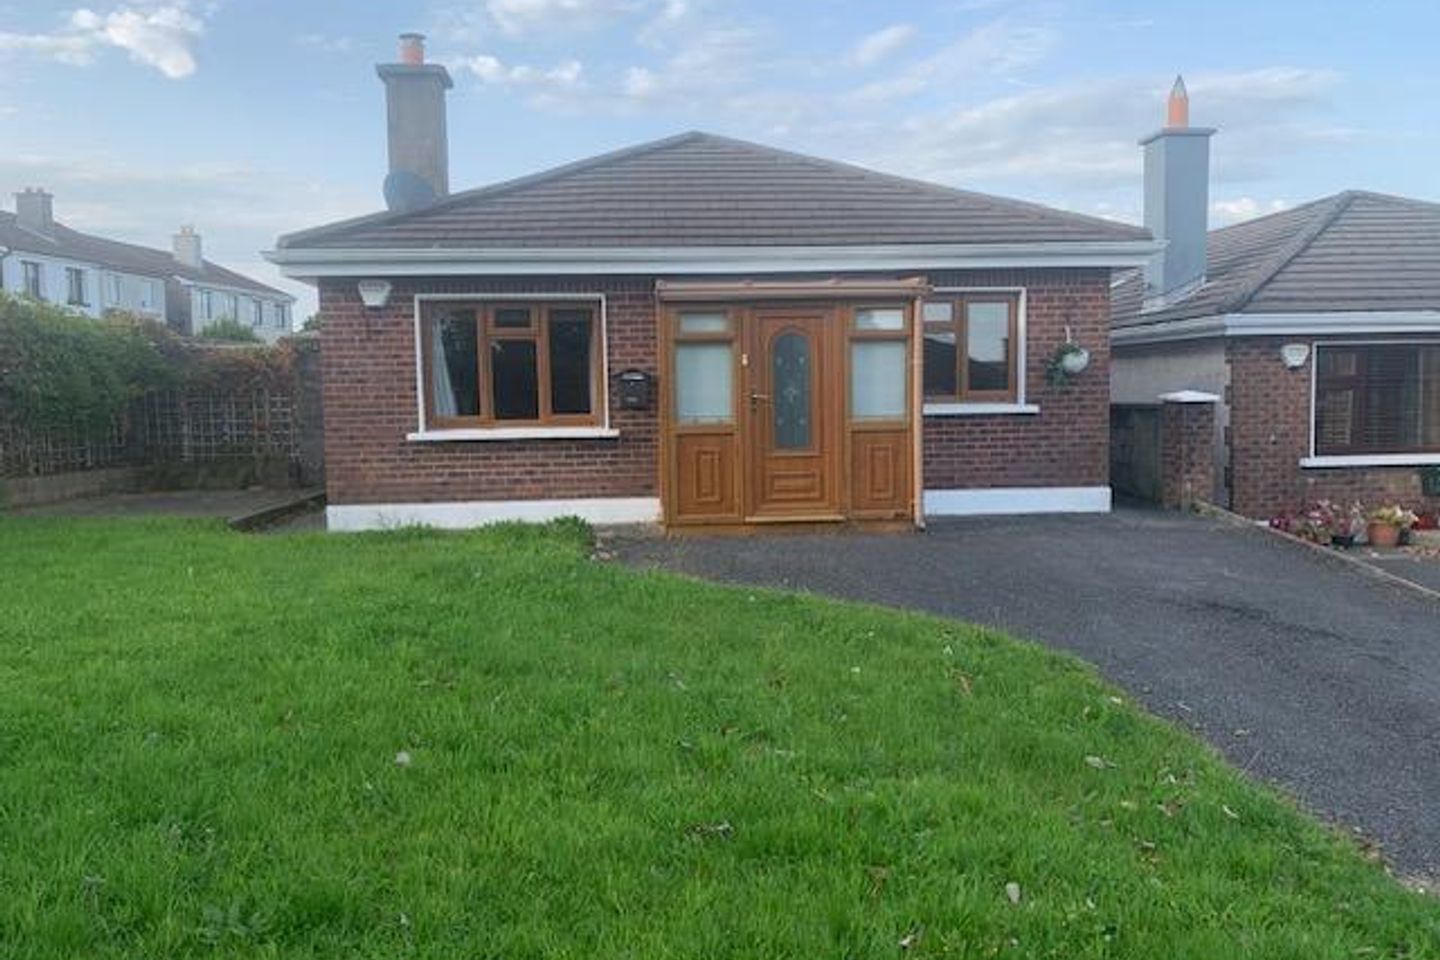 251 Laurel Park, Newcastle, Newcastle, Co. Galway, H91YDC1